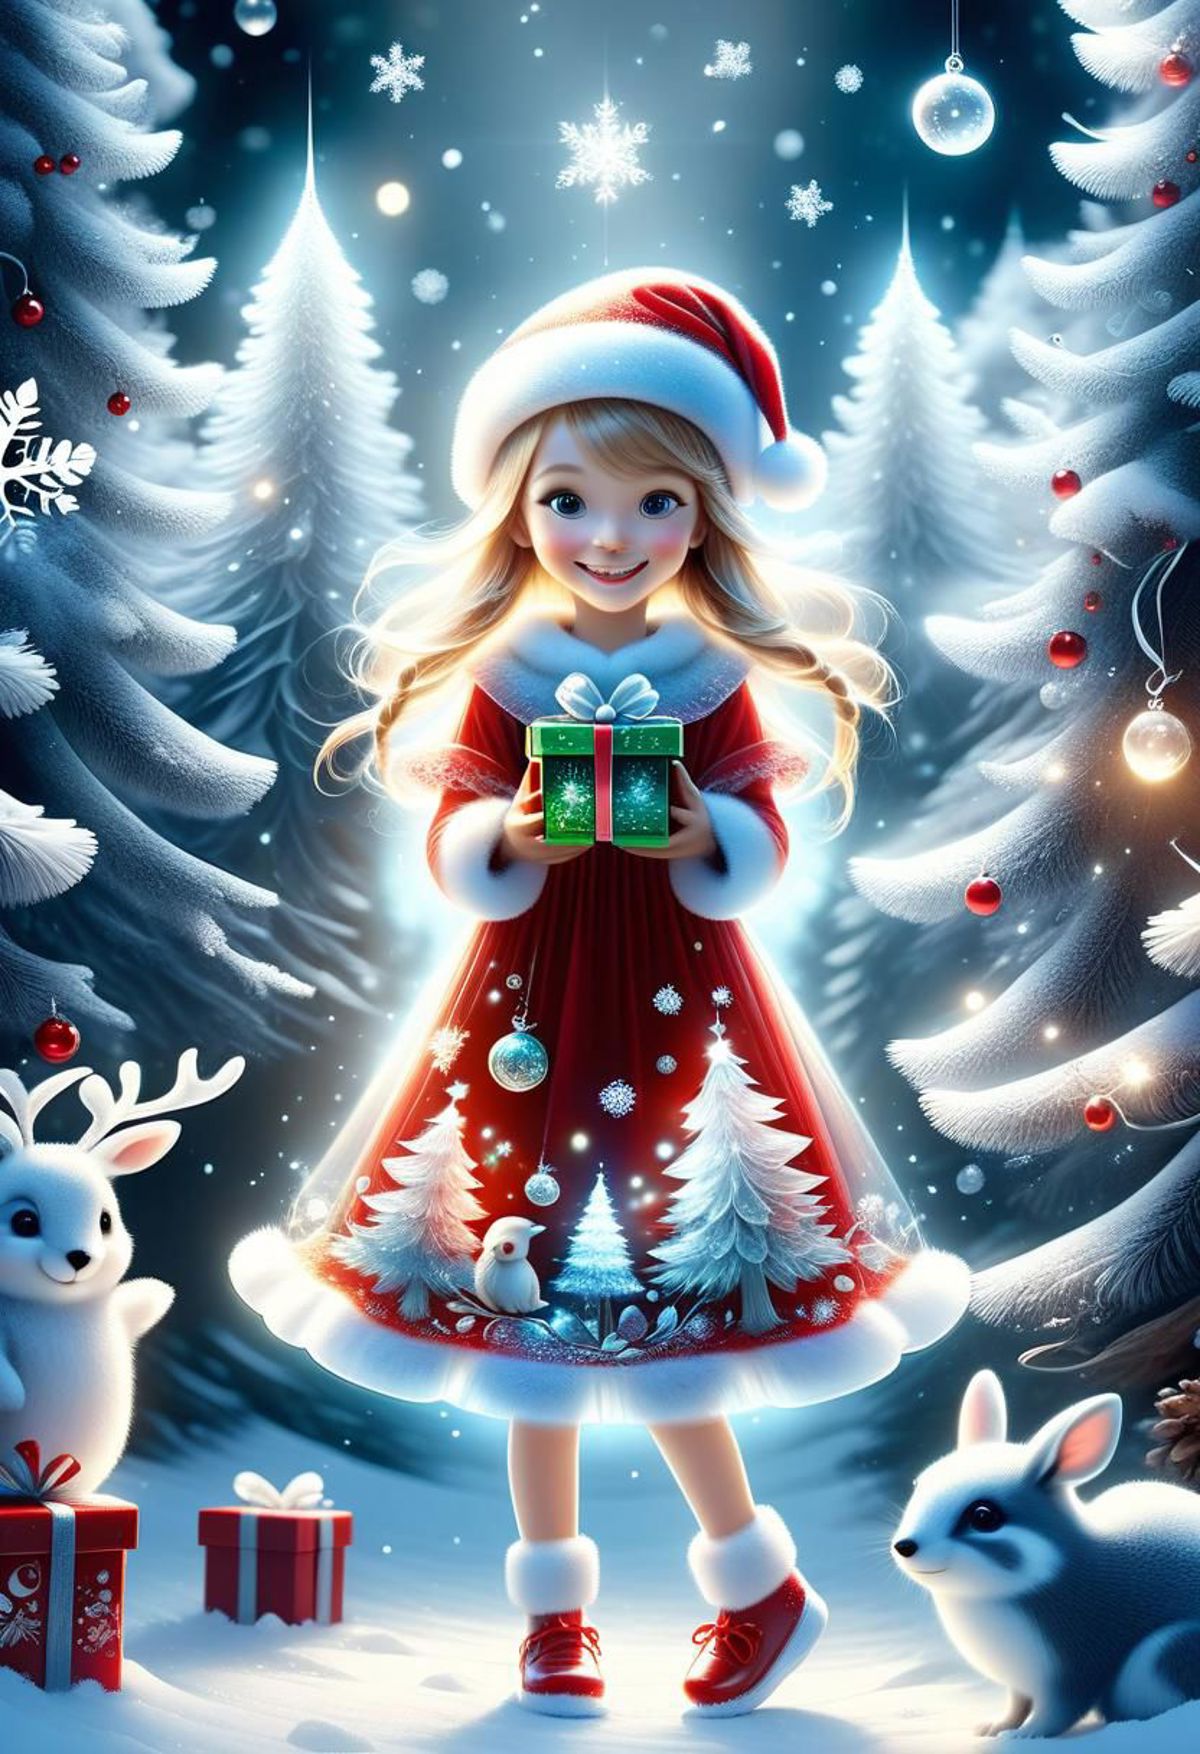 A Smiling Cartoon Girl in a Christmas Dress Holding Presents.